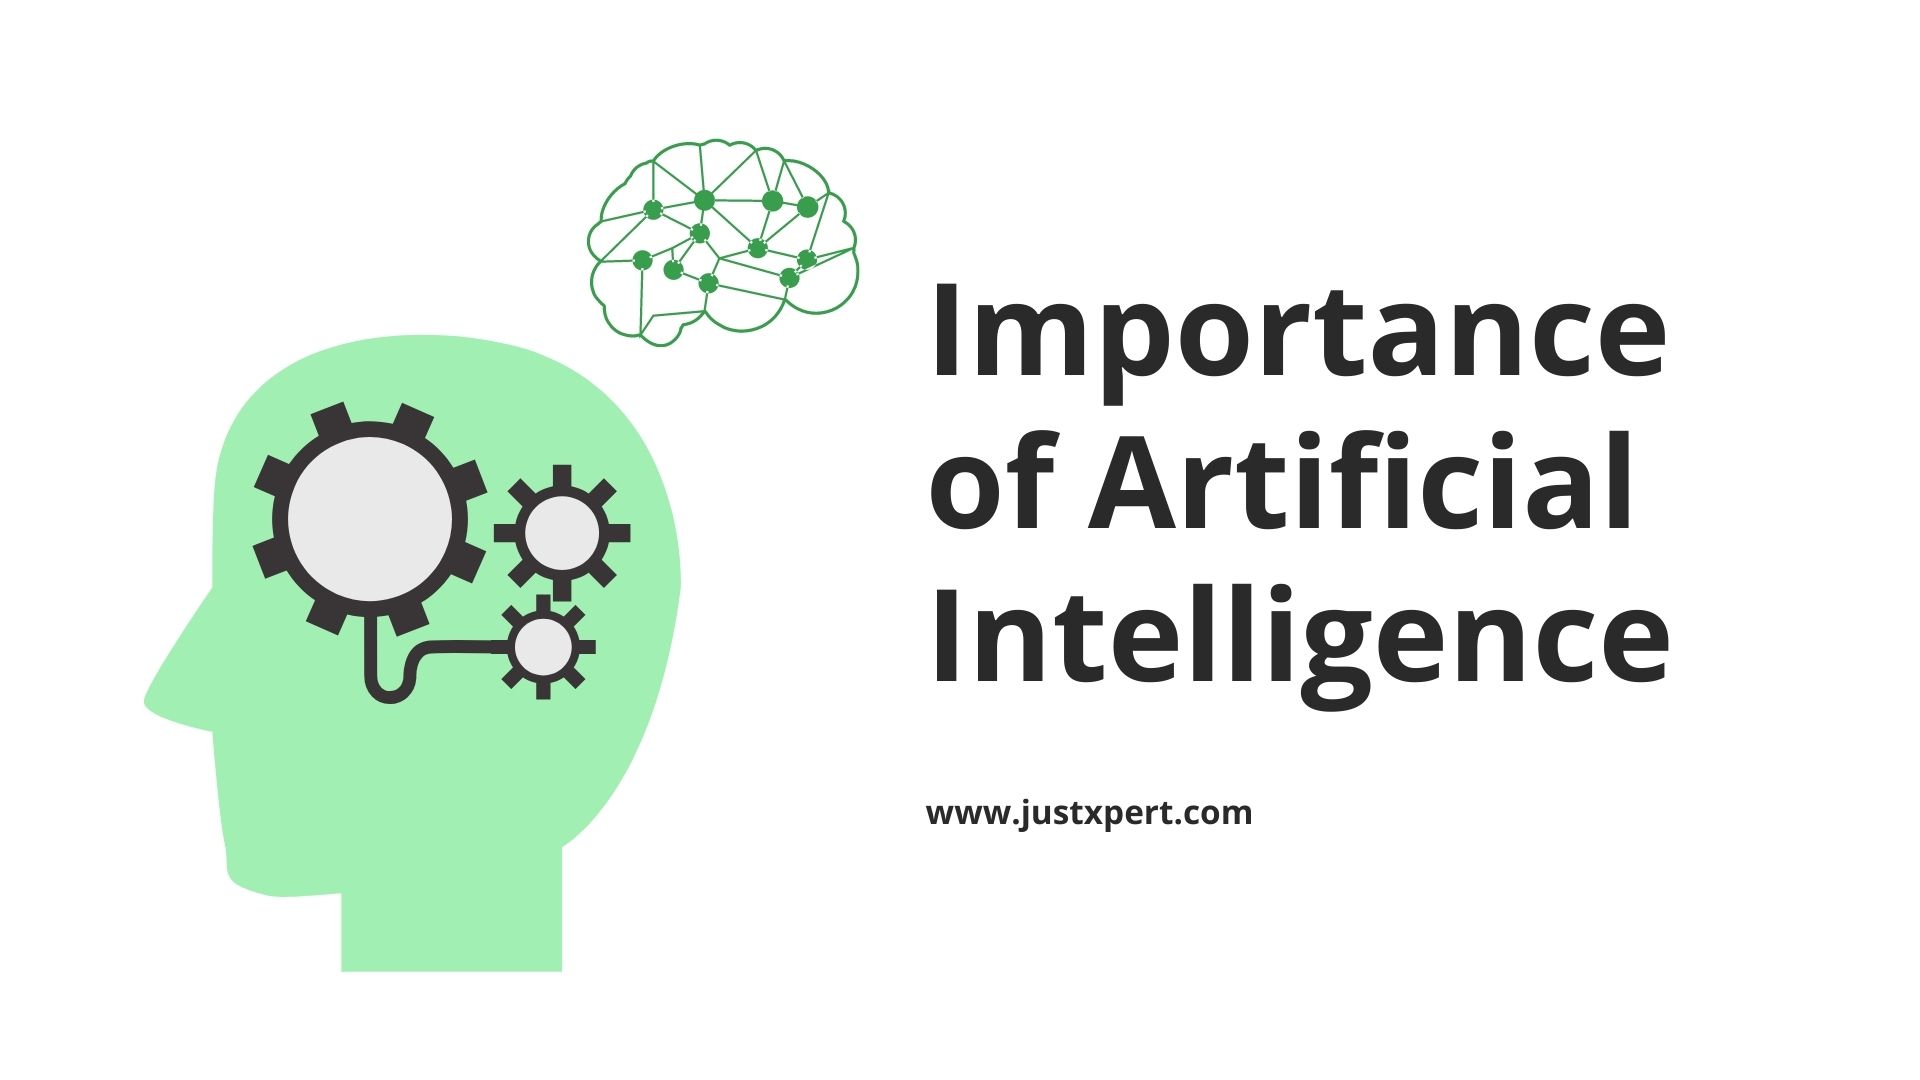 Importance of Artificial Intelligence